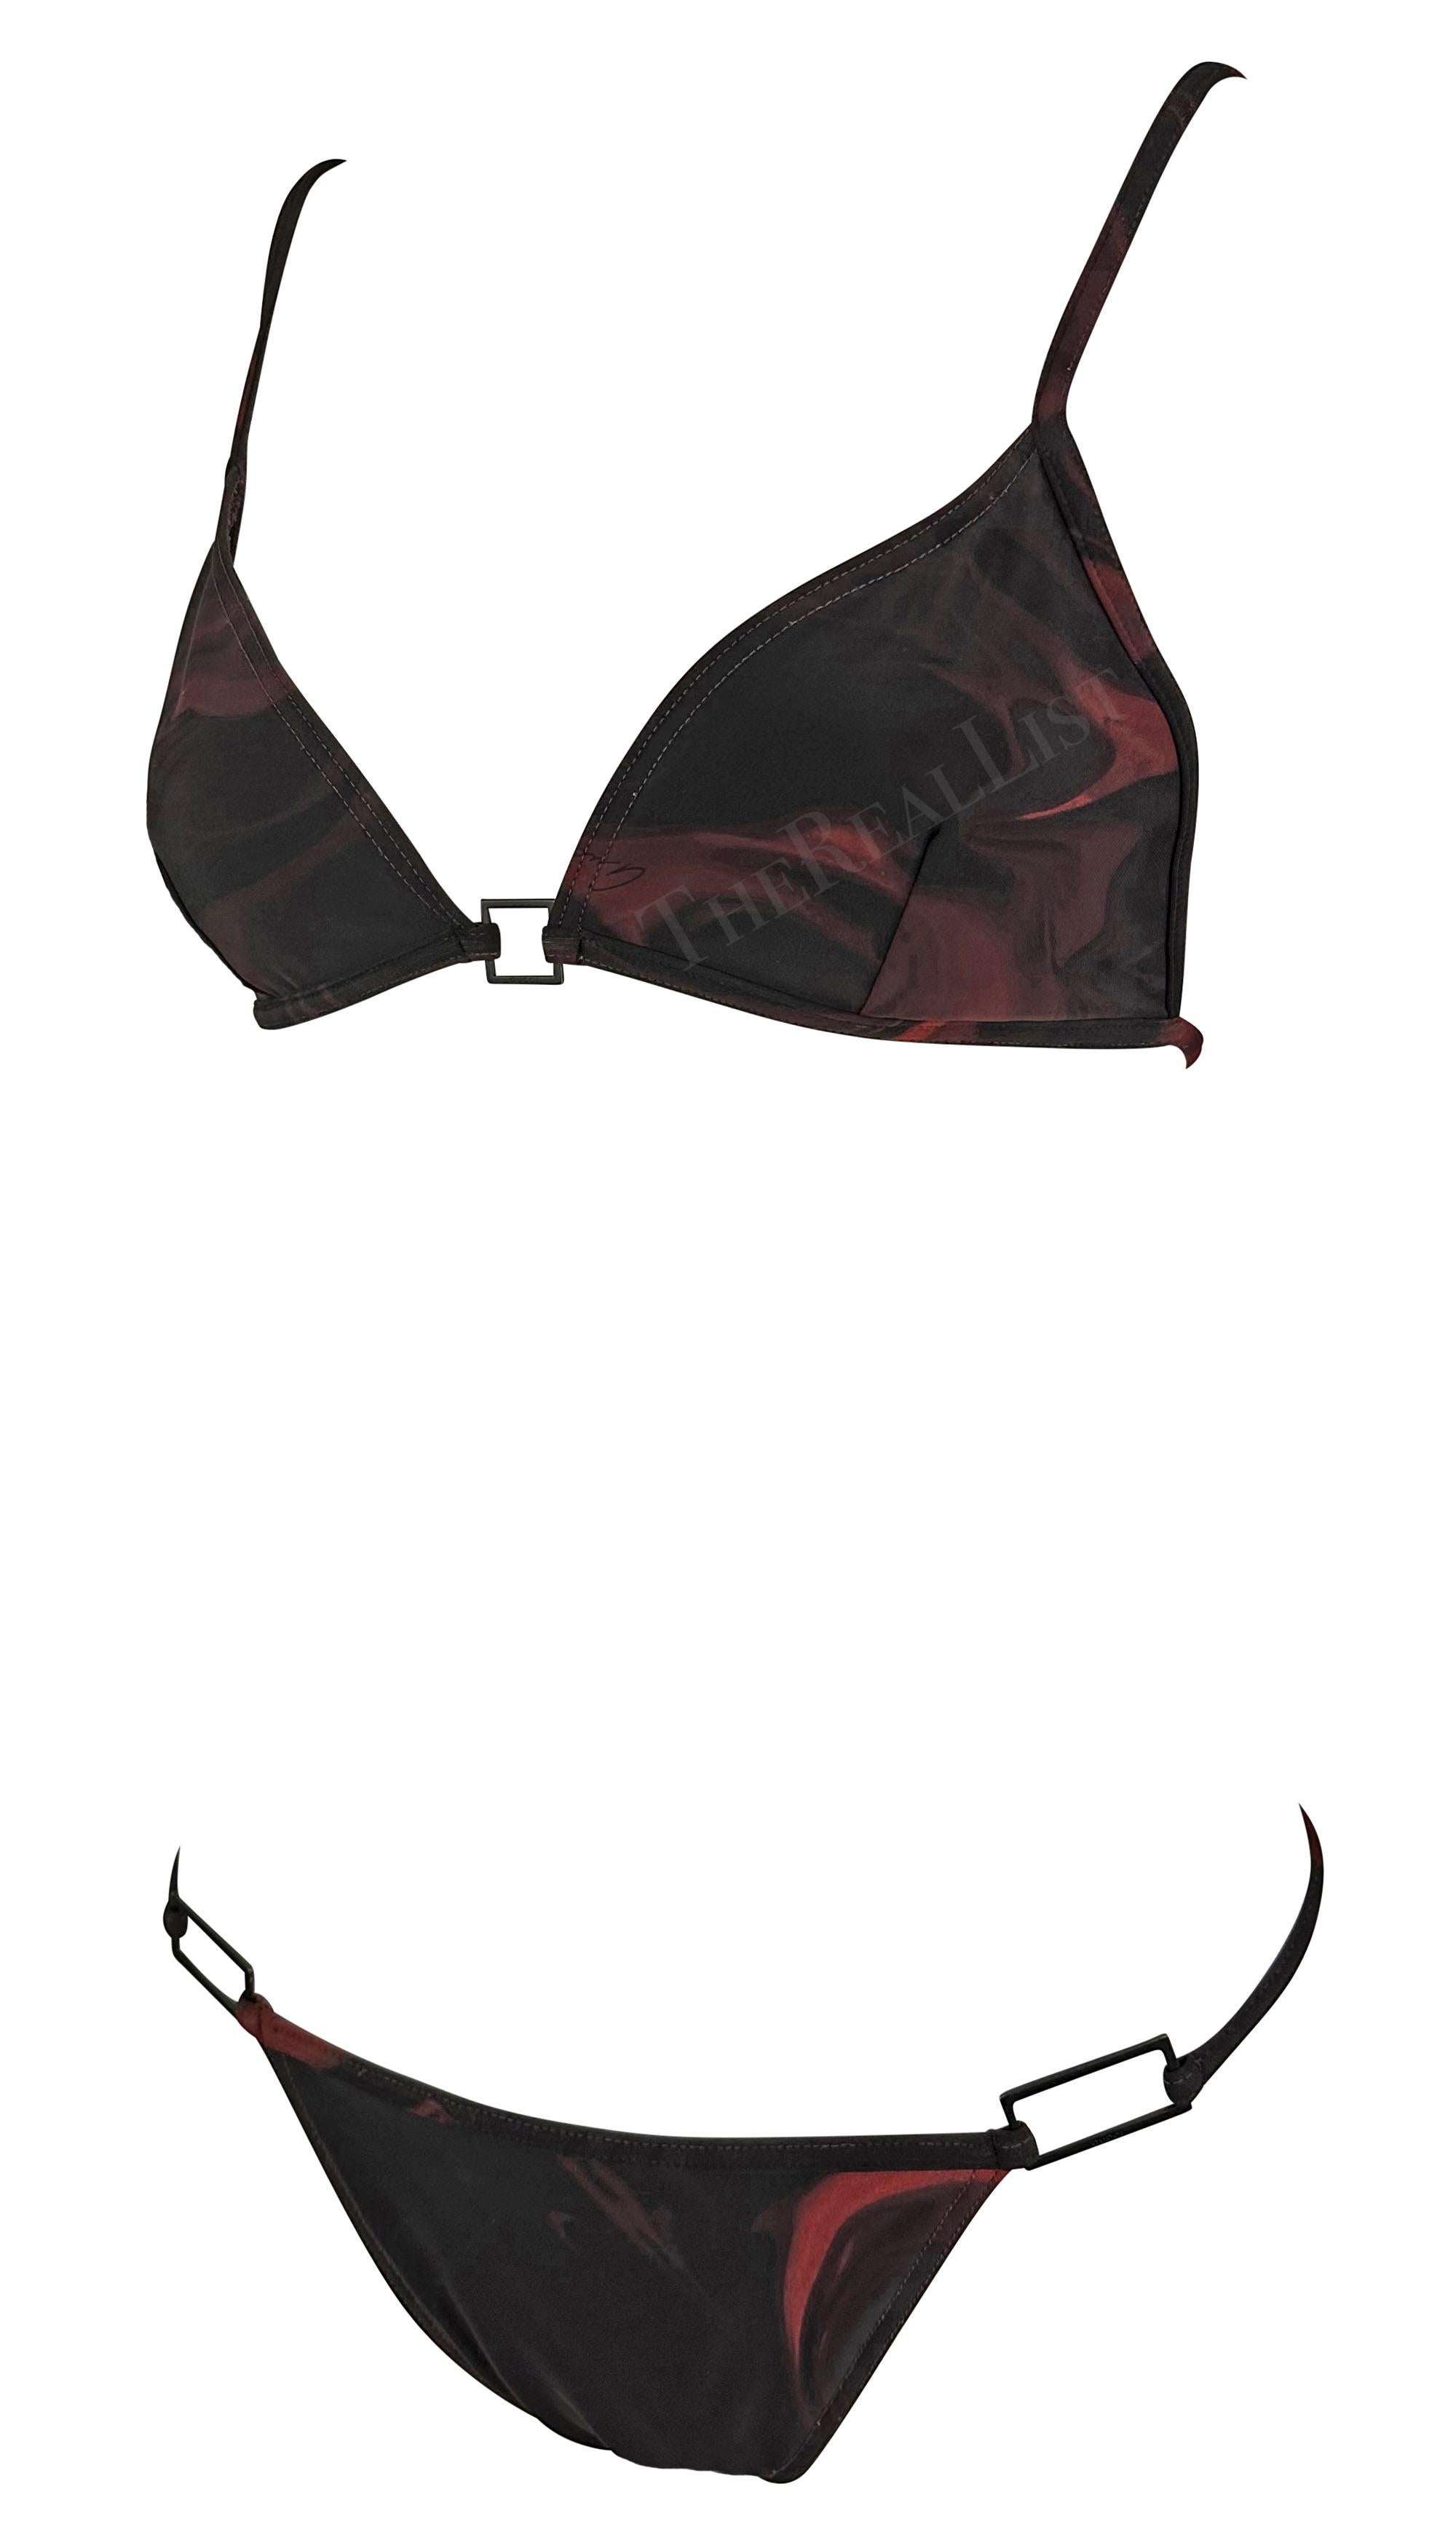 S/S 2001 Gucci by Tom Ford Black Red Magma Print Logo Buckle Bikini Two-Pieces en vente 4